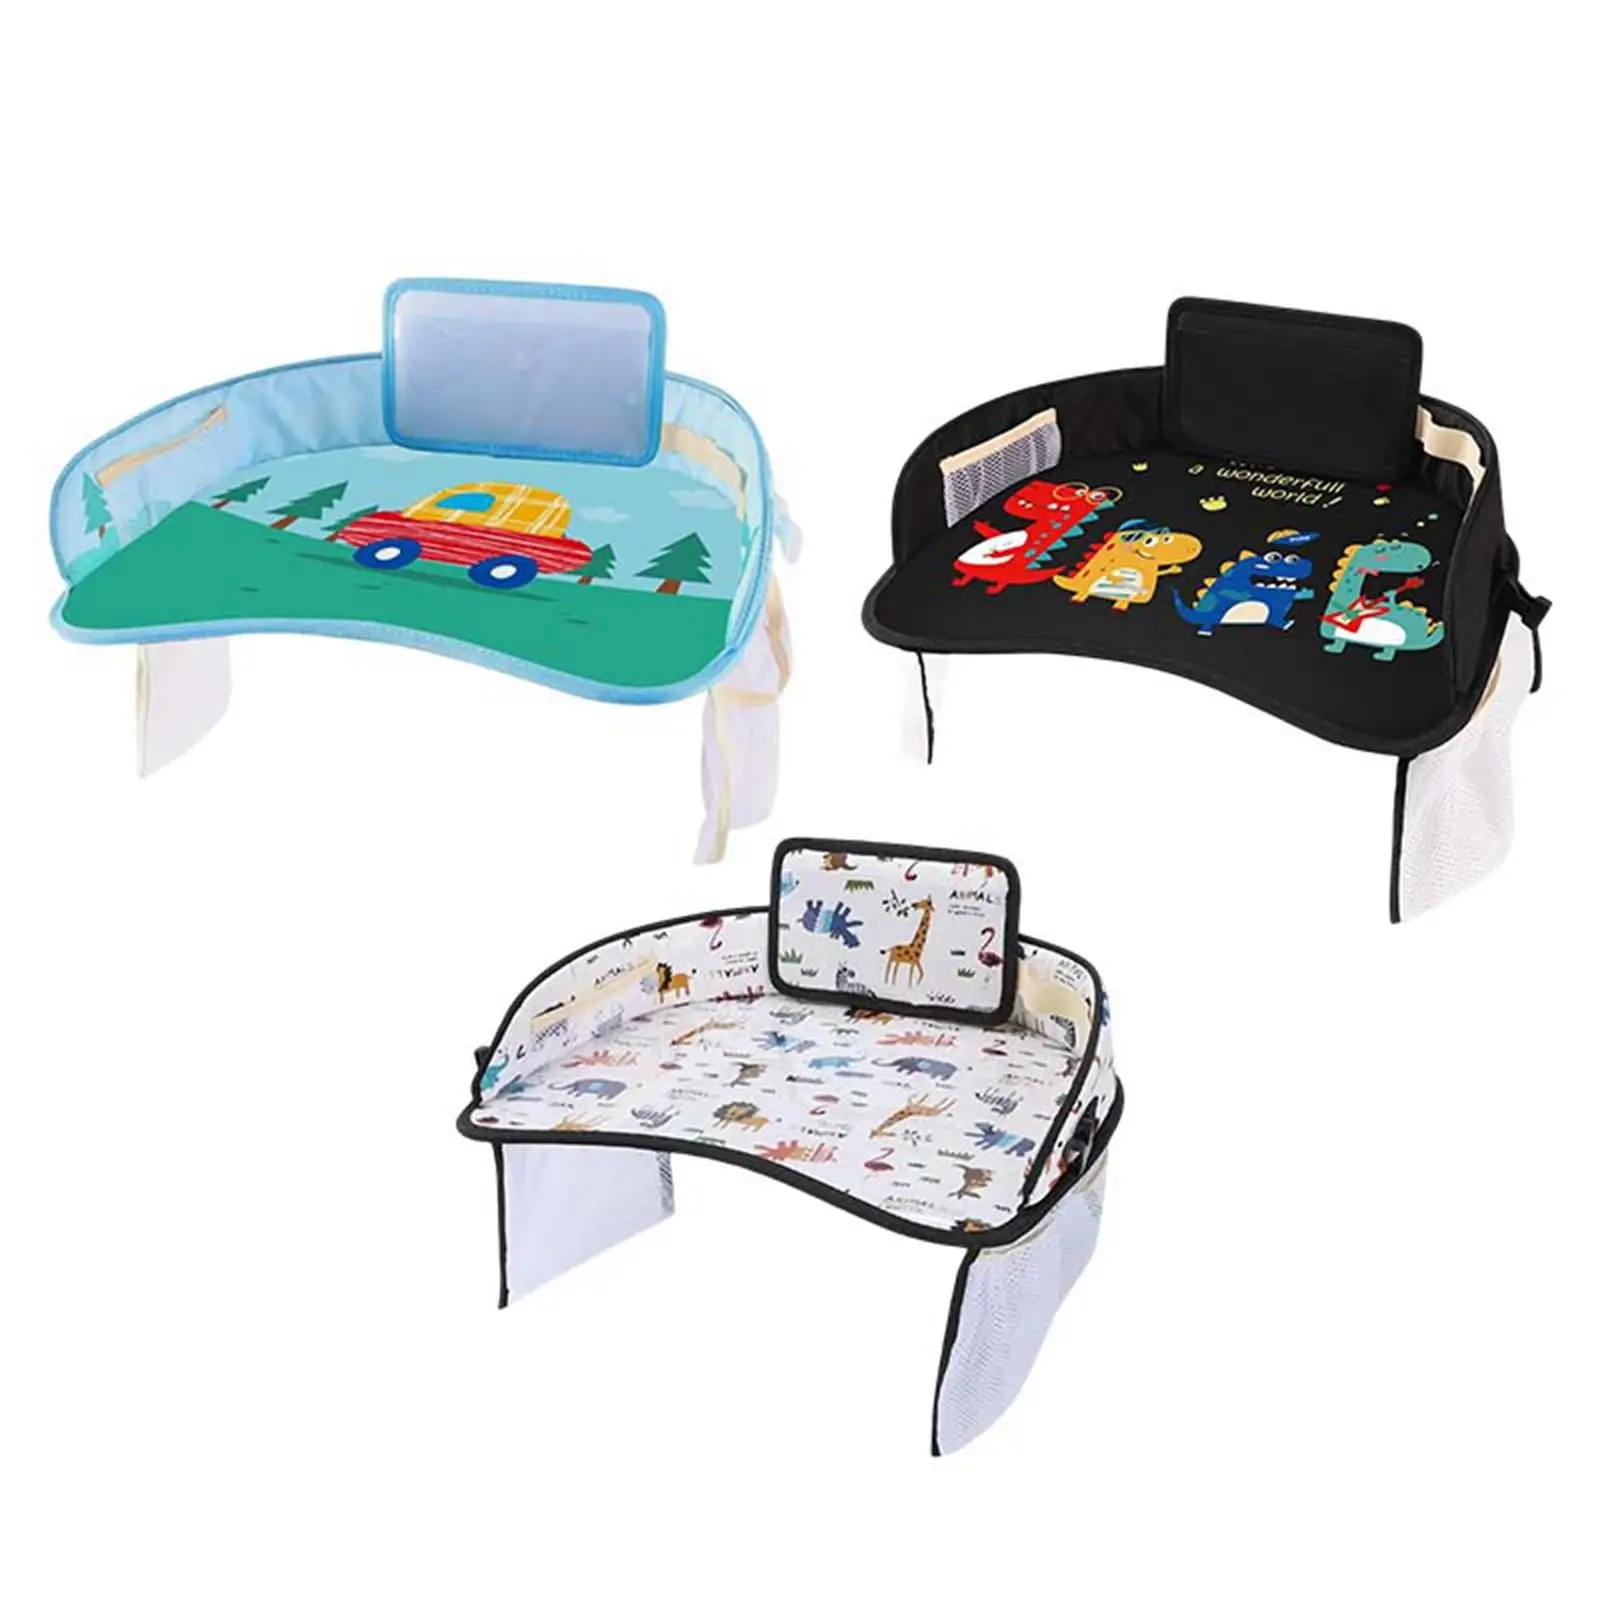 Kids Eating Drawing Snack Activity Tray for Carseat Stroller